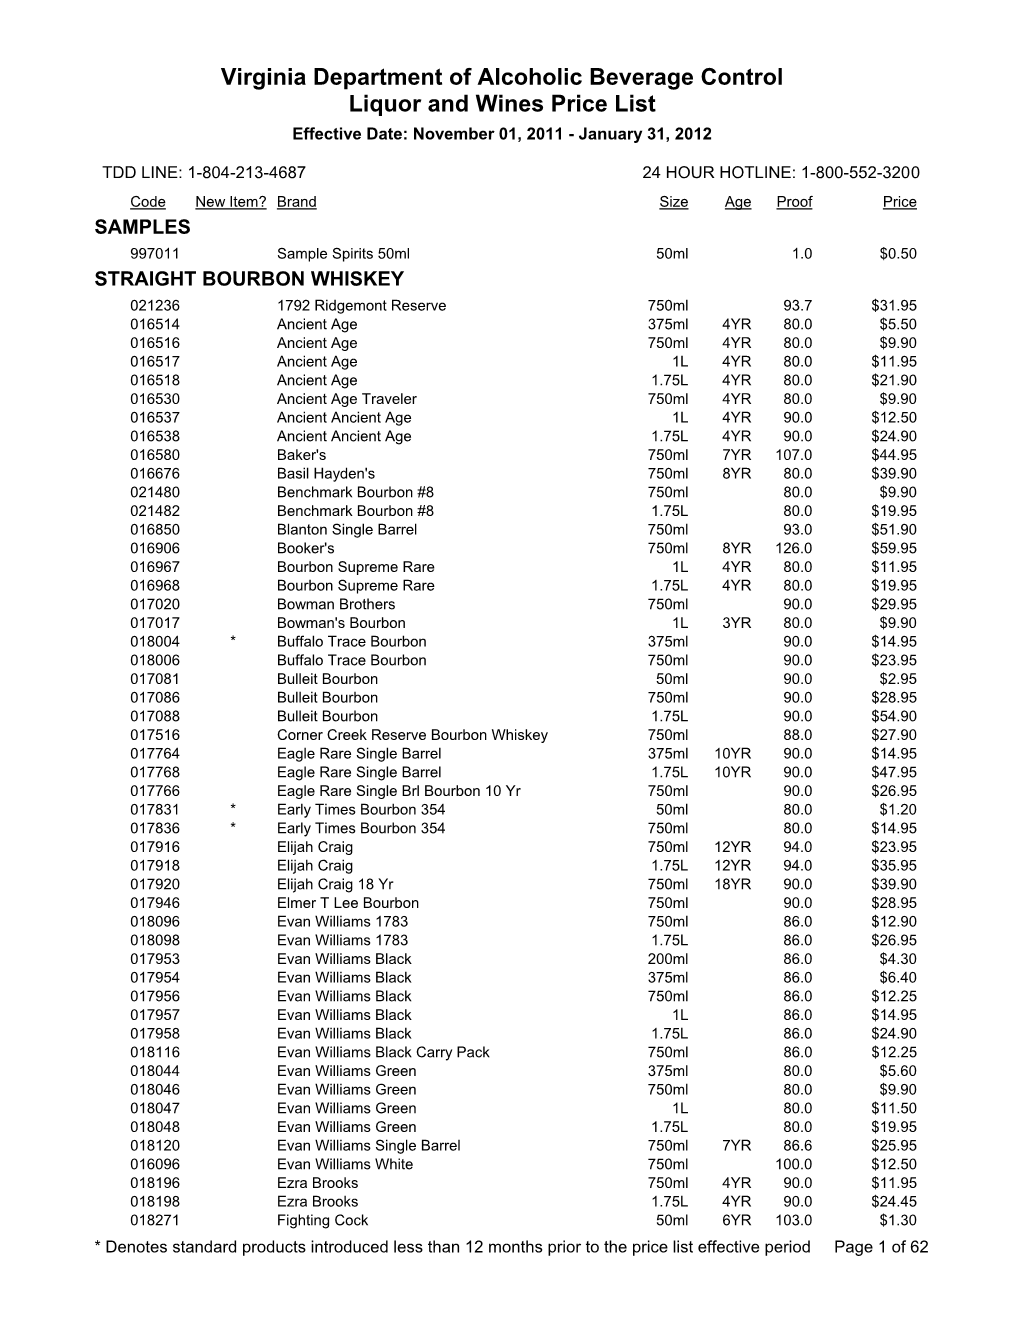 Virginia Department of Alcoholic Beverage Control Liquor and Wines Price List Effective Date: November 01, 2011 - January 31, 2012